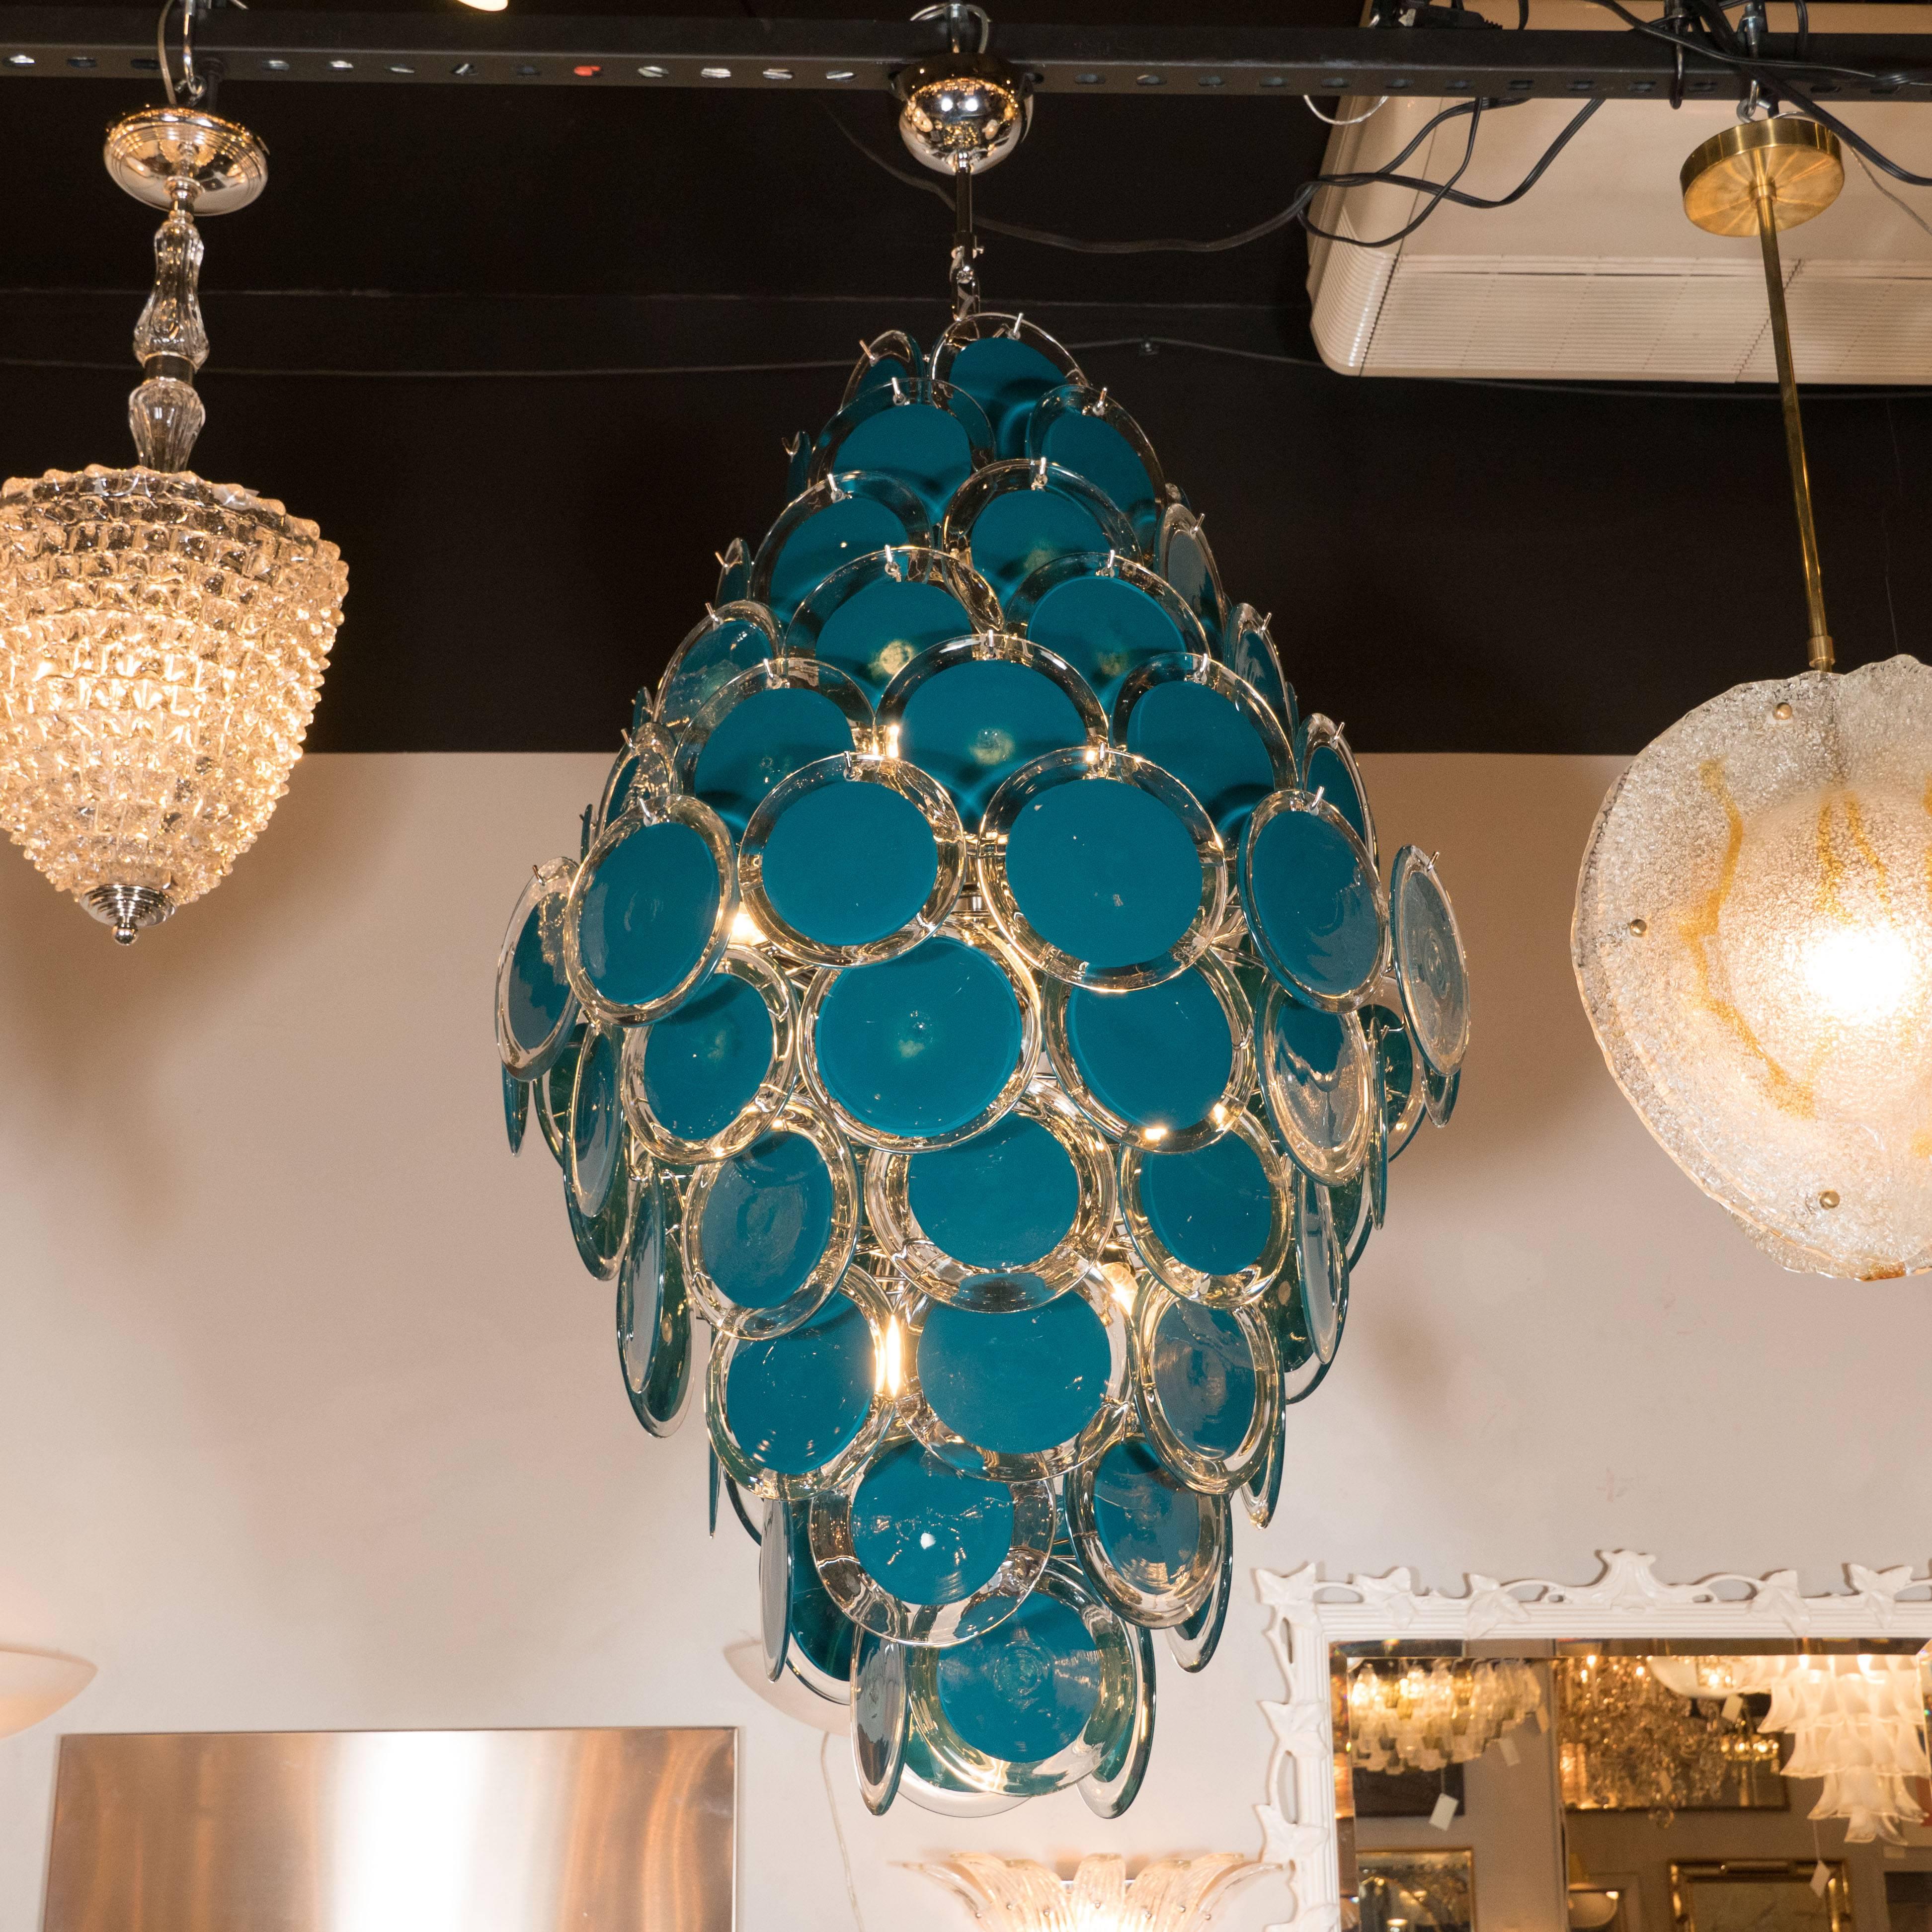 This stunning and bold chandelier was handblown in Murano, Italy- the islands off the coast of Venice renowned for centuries for their superlative glass production. It features ten tiers of cerulean blue discs with clear perimeters that taper at its